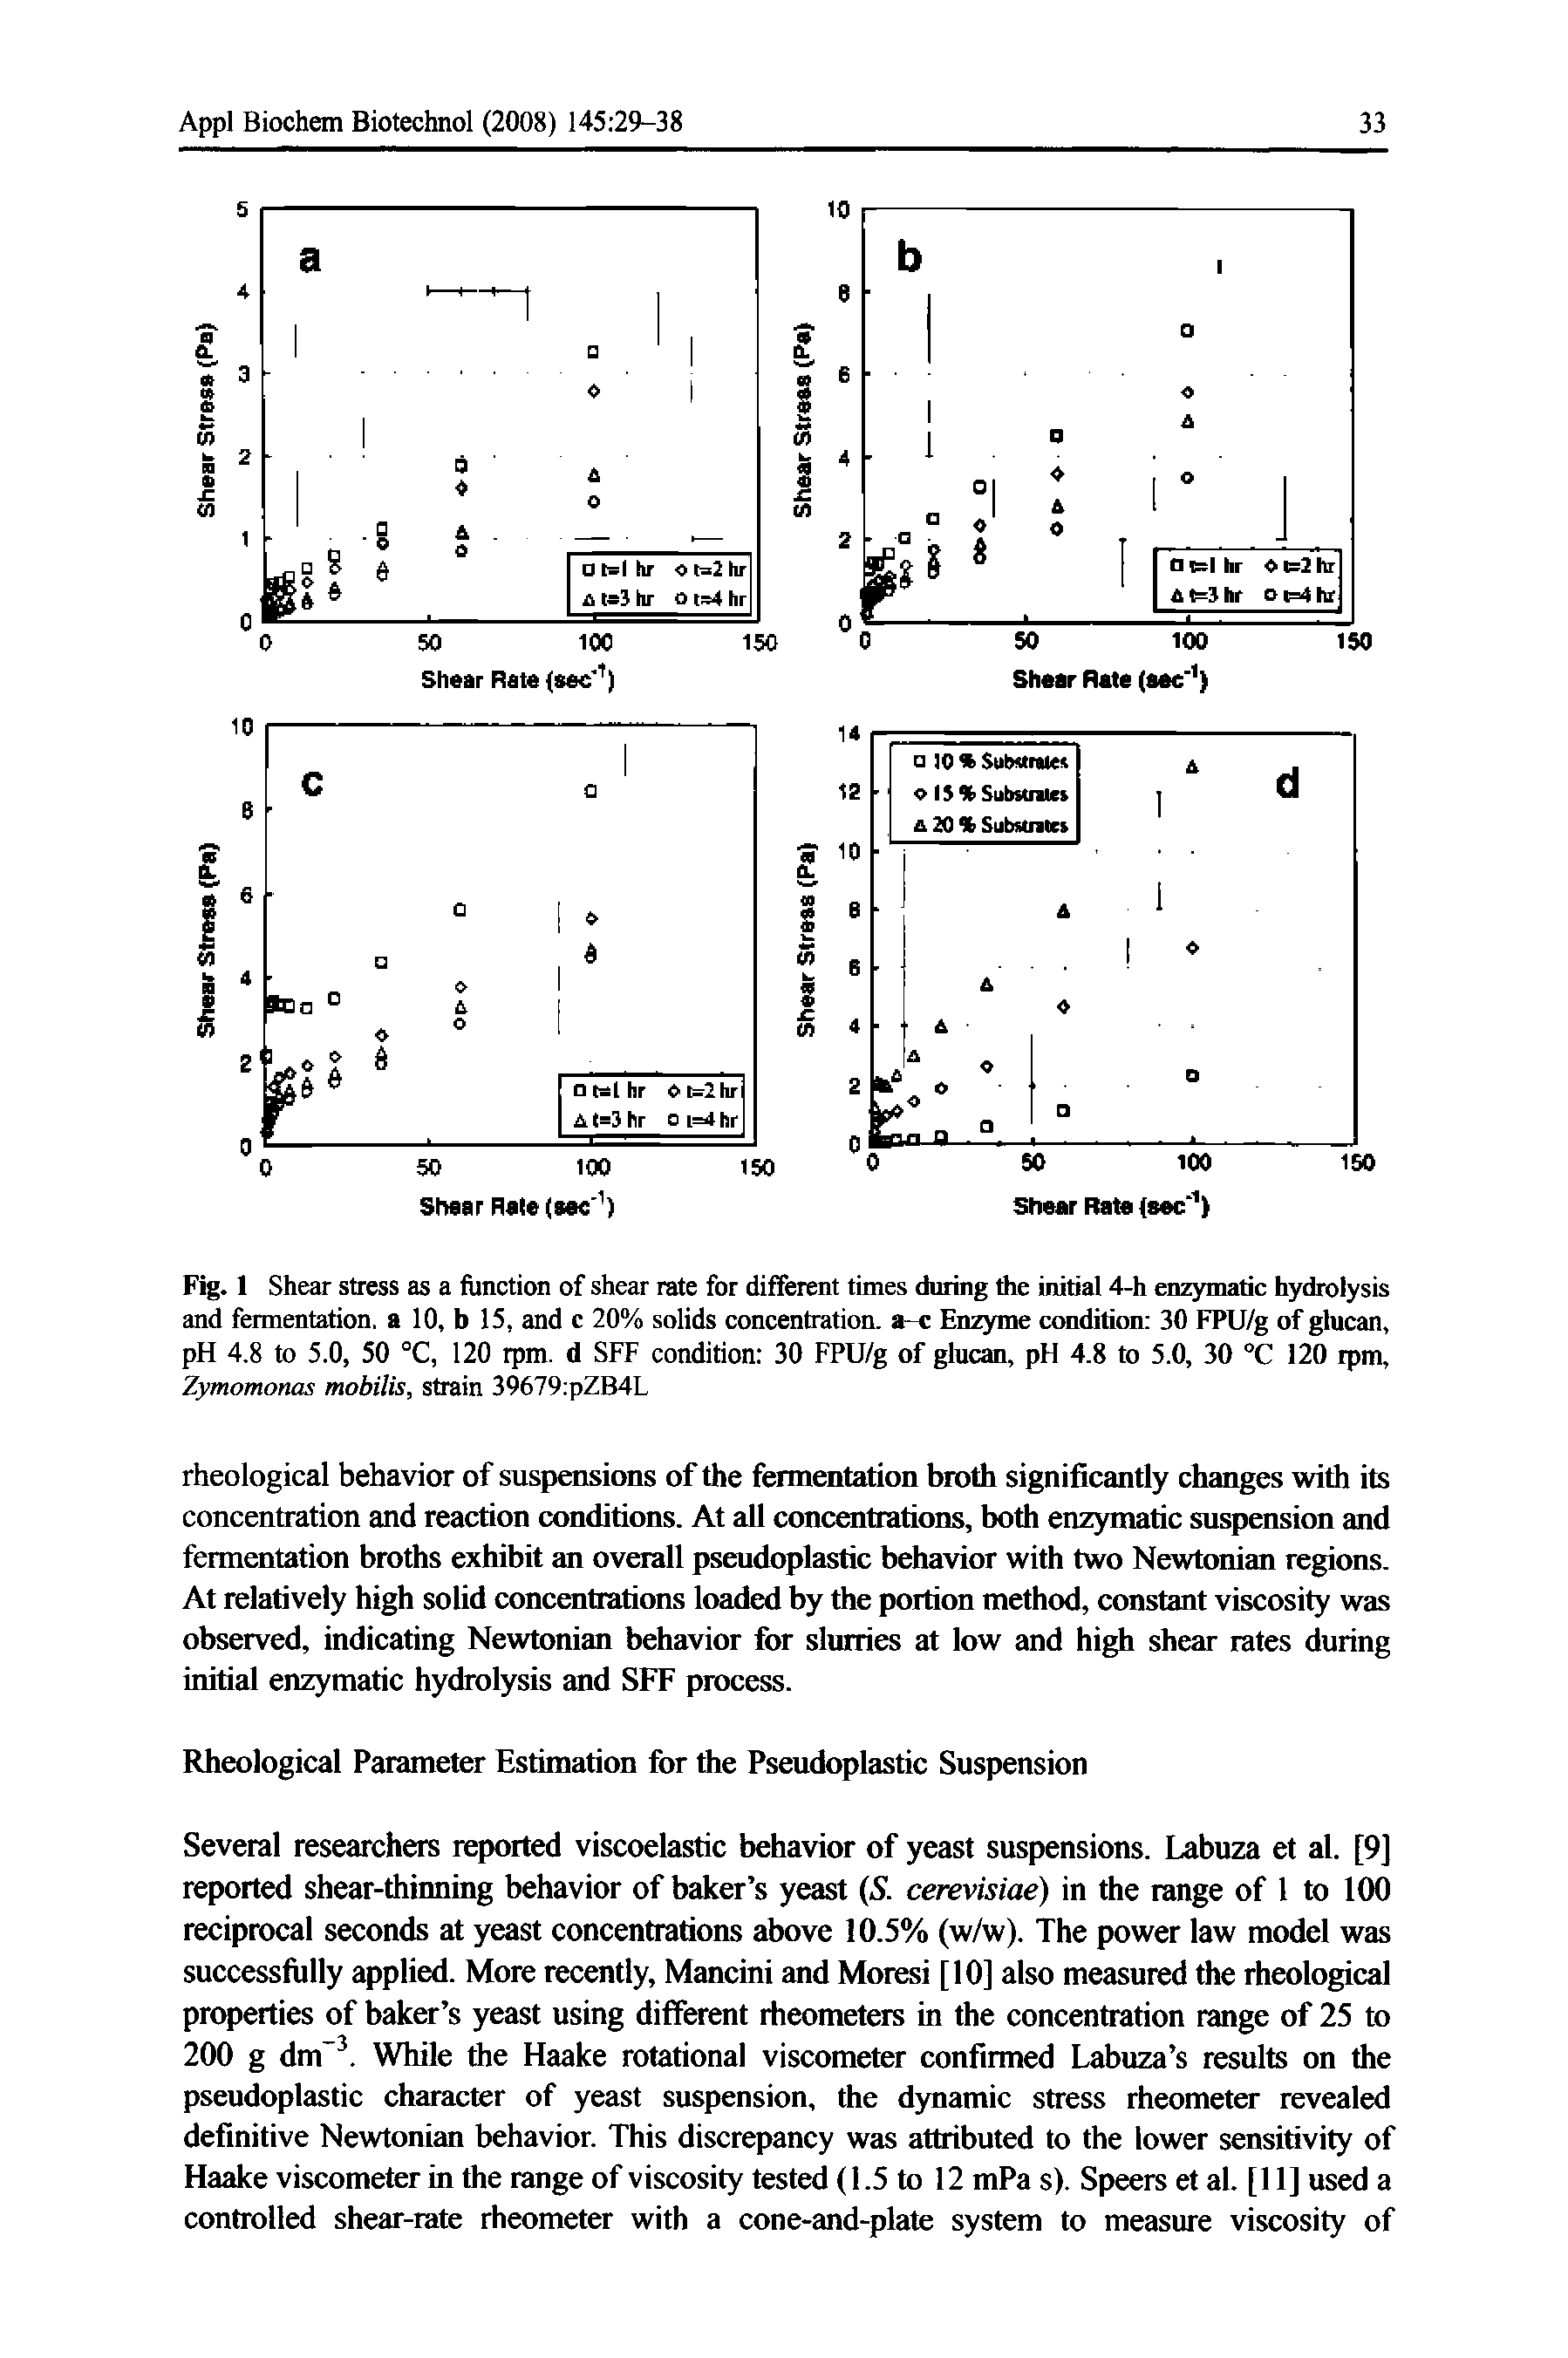 Fig. 1 Shear stress as a function of shear rate for different times during the initial 4-h enzymatic hydrolysis and fermentation, a 10, b 15, and c 20% solids concentration, a-c Enzyme condition 30 FPU/g of glucan, pH 4.8 to 5.0, 50 °C, 120 rpm. d SFF condition 30 FPU/g of glucan, pH 4.8 to 5.0, 30 °C 120 rpm, Zymomonas mobilis, strain 39679 pZB4L...